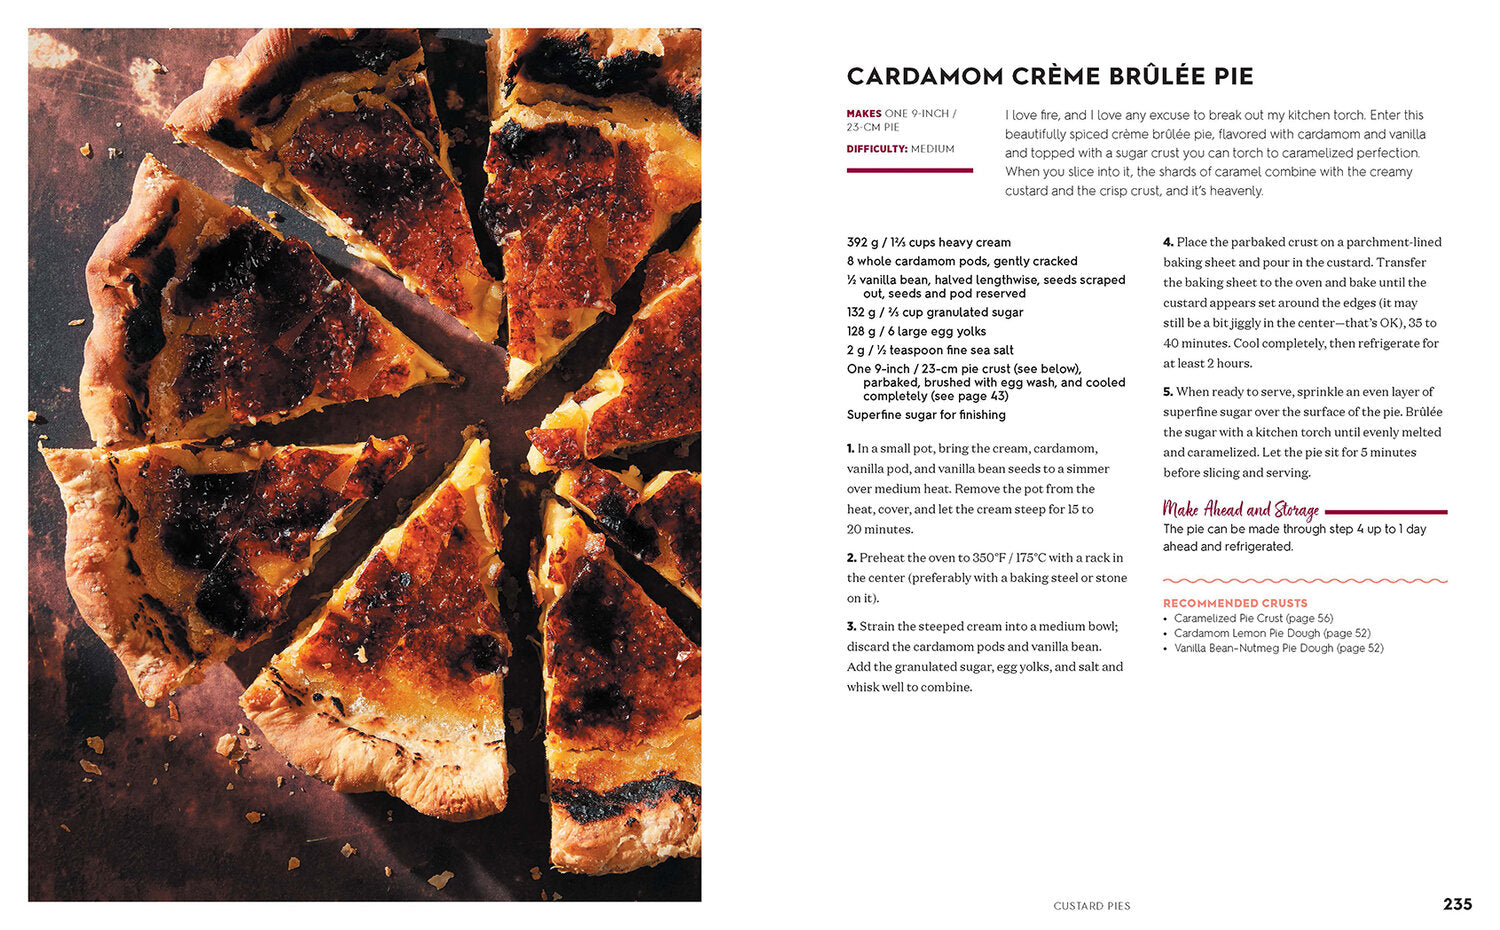 inside pages from book with photo and recipe for cardamom creme brulee pie.